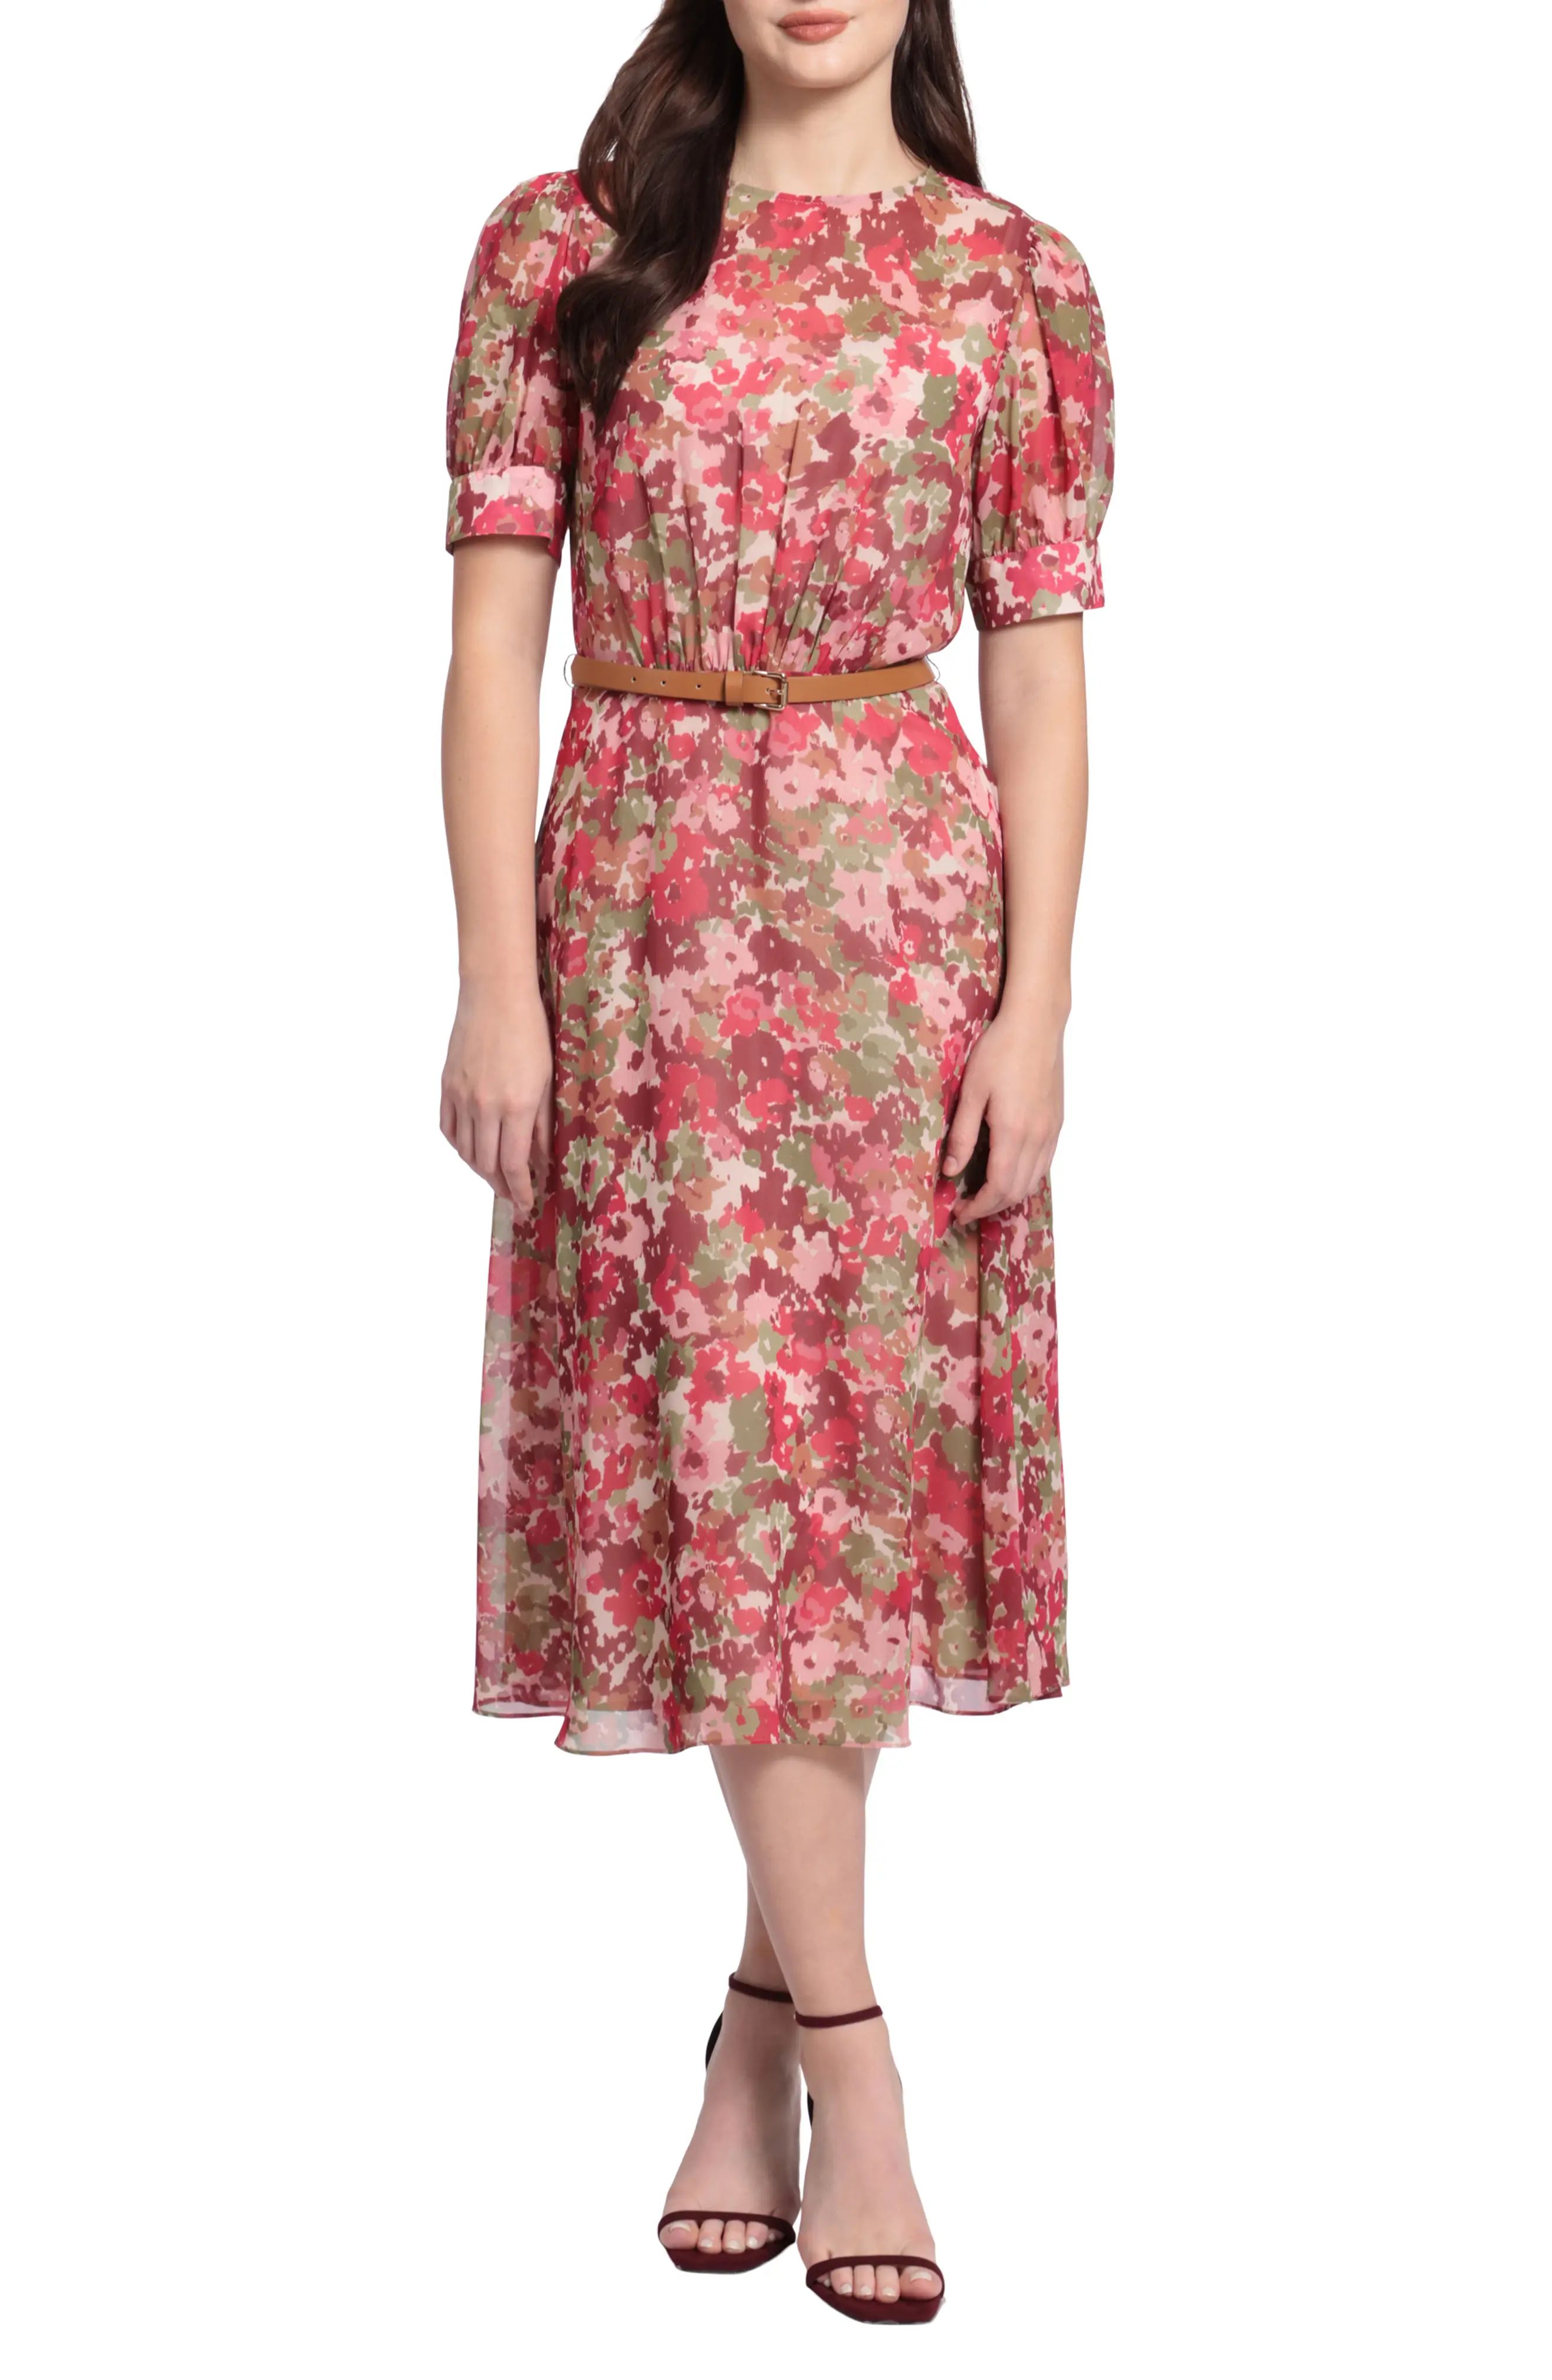 Maggy London Floral Chiffon Midi Dress in Blush/Red at Nordstrom, Size 6 | Nordstrom